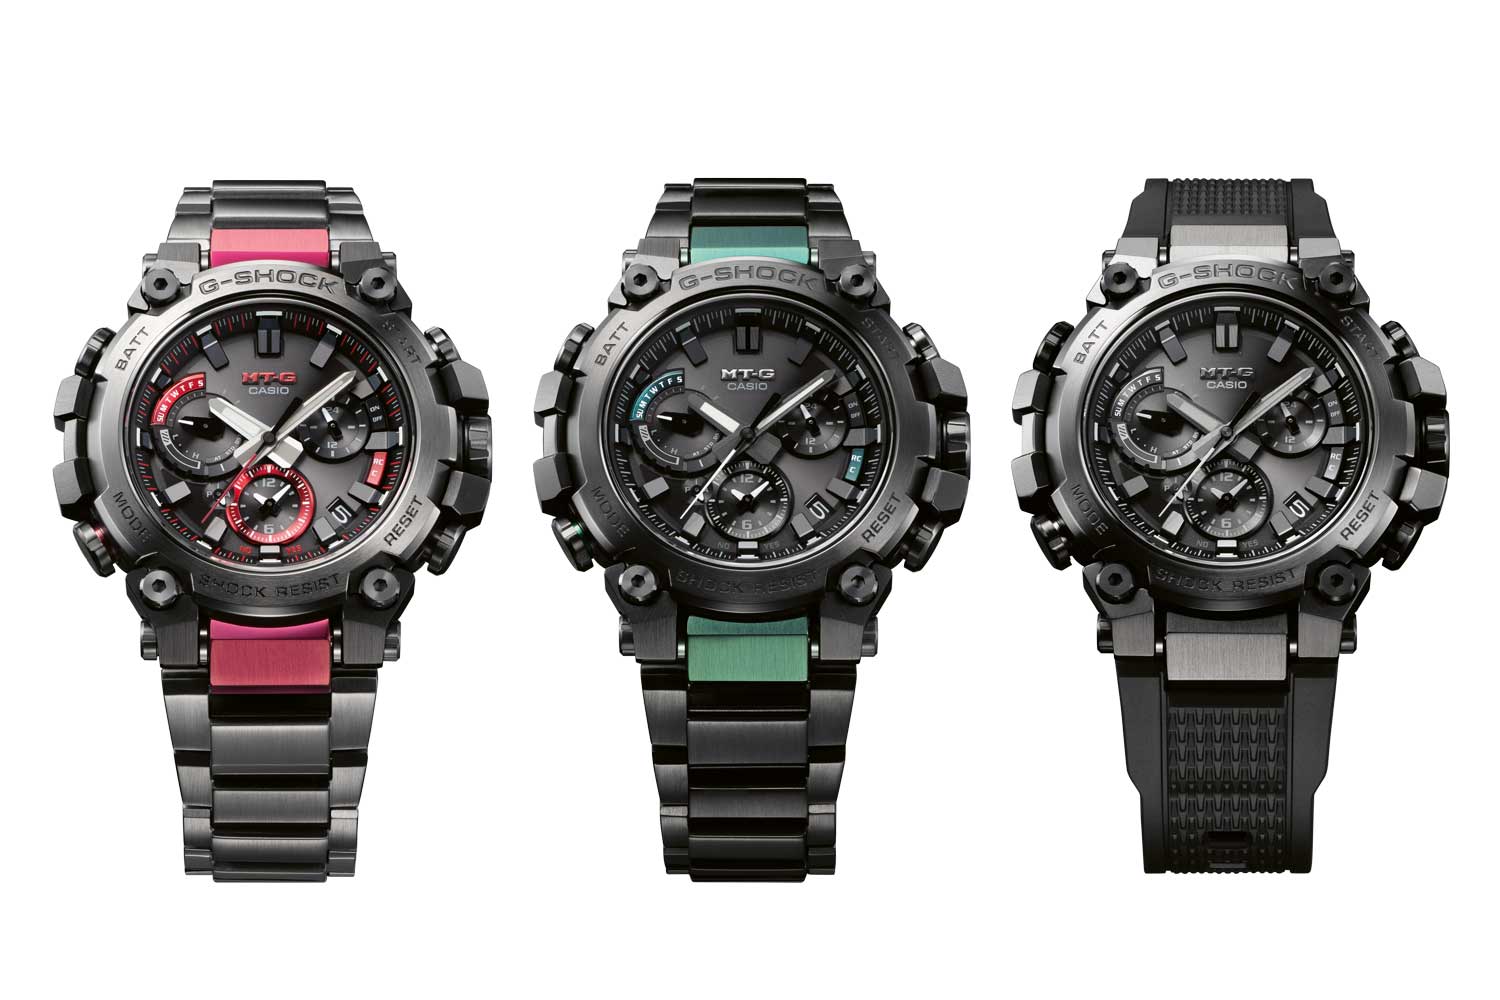 From left: MTG-B3000 in gray with red IP, black with green IP and monotone black and gray